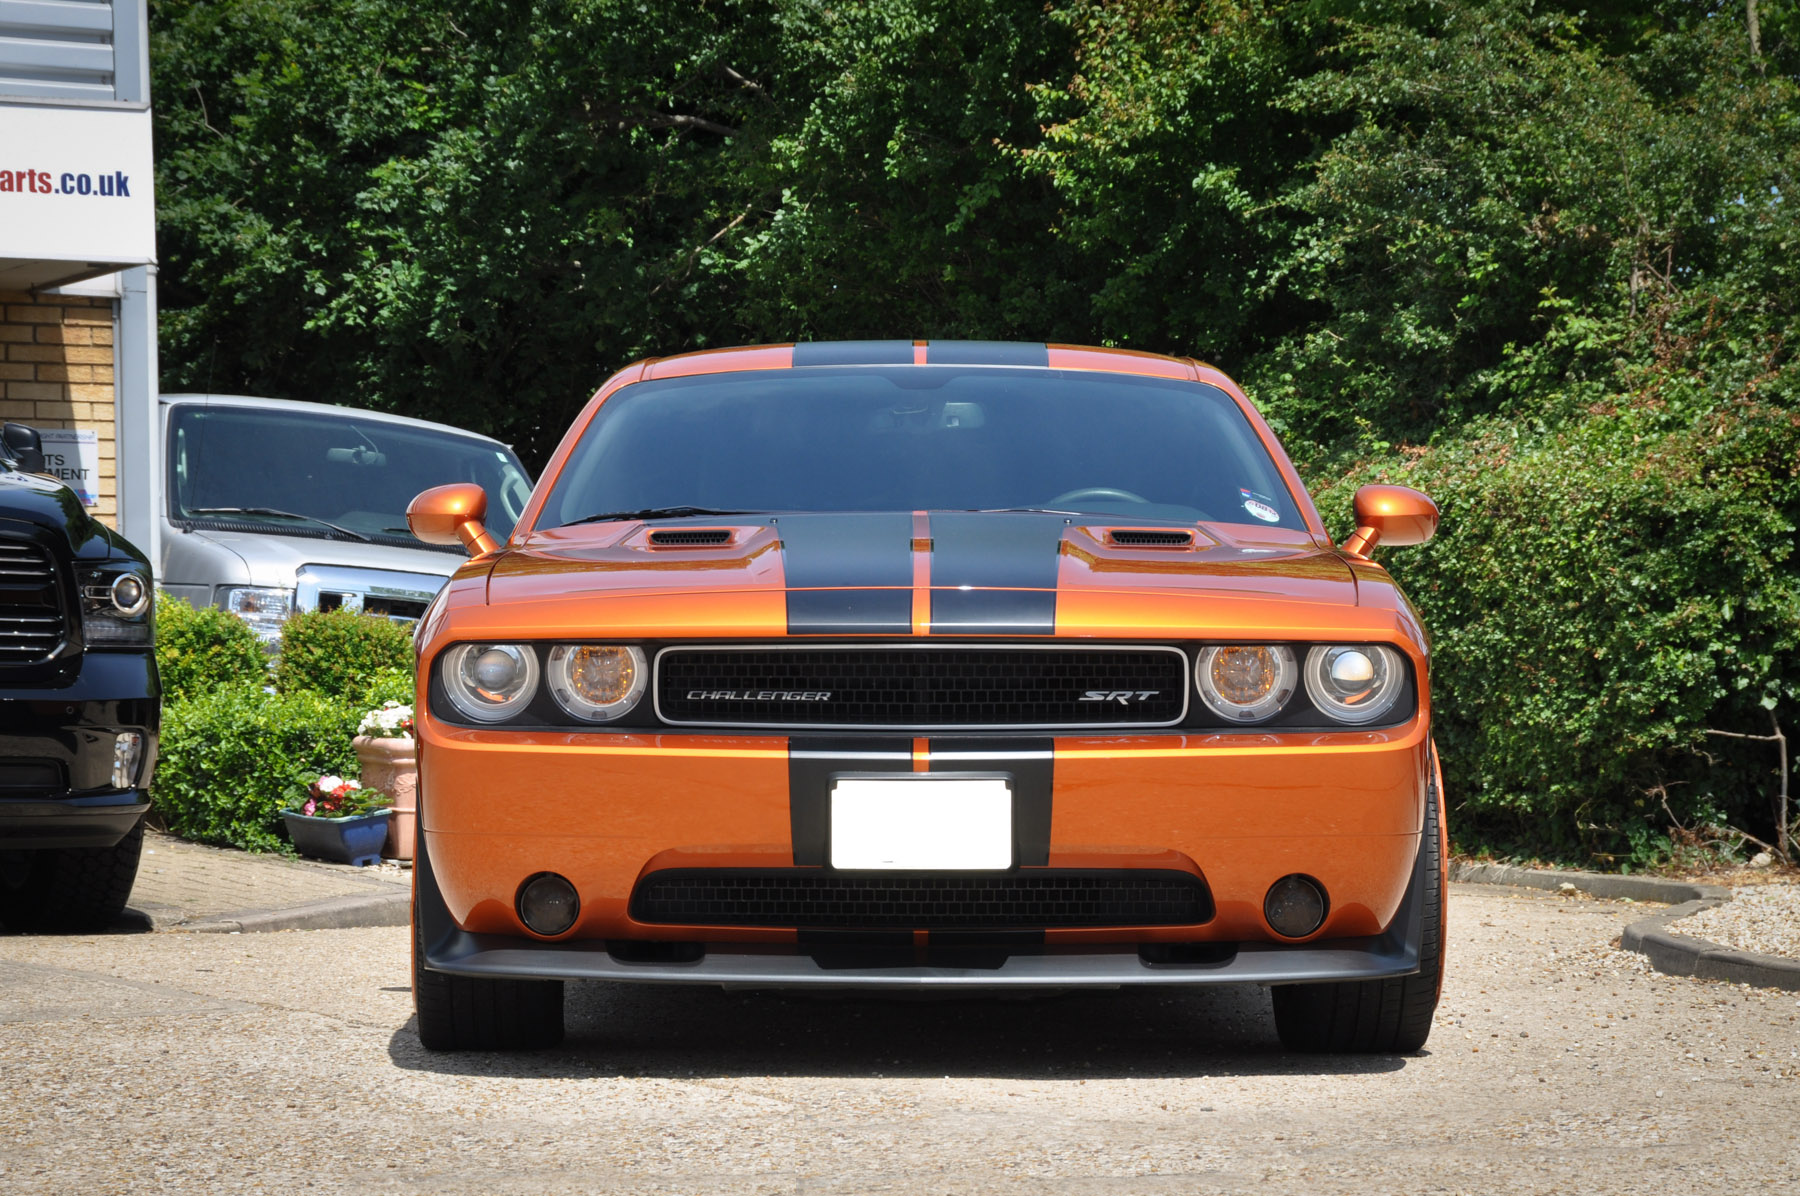 2011 Dodge Challenger Srt8 392 Automatic David Boatwright Partnership Official Dodge And